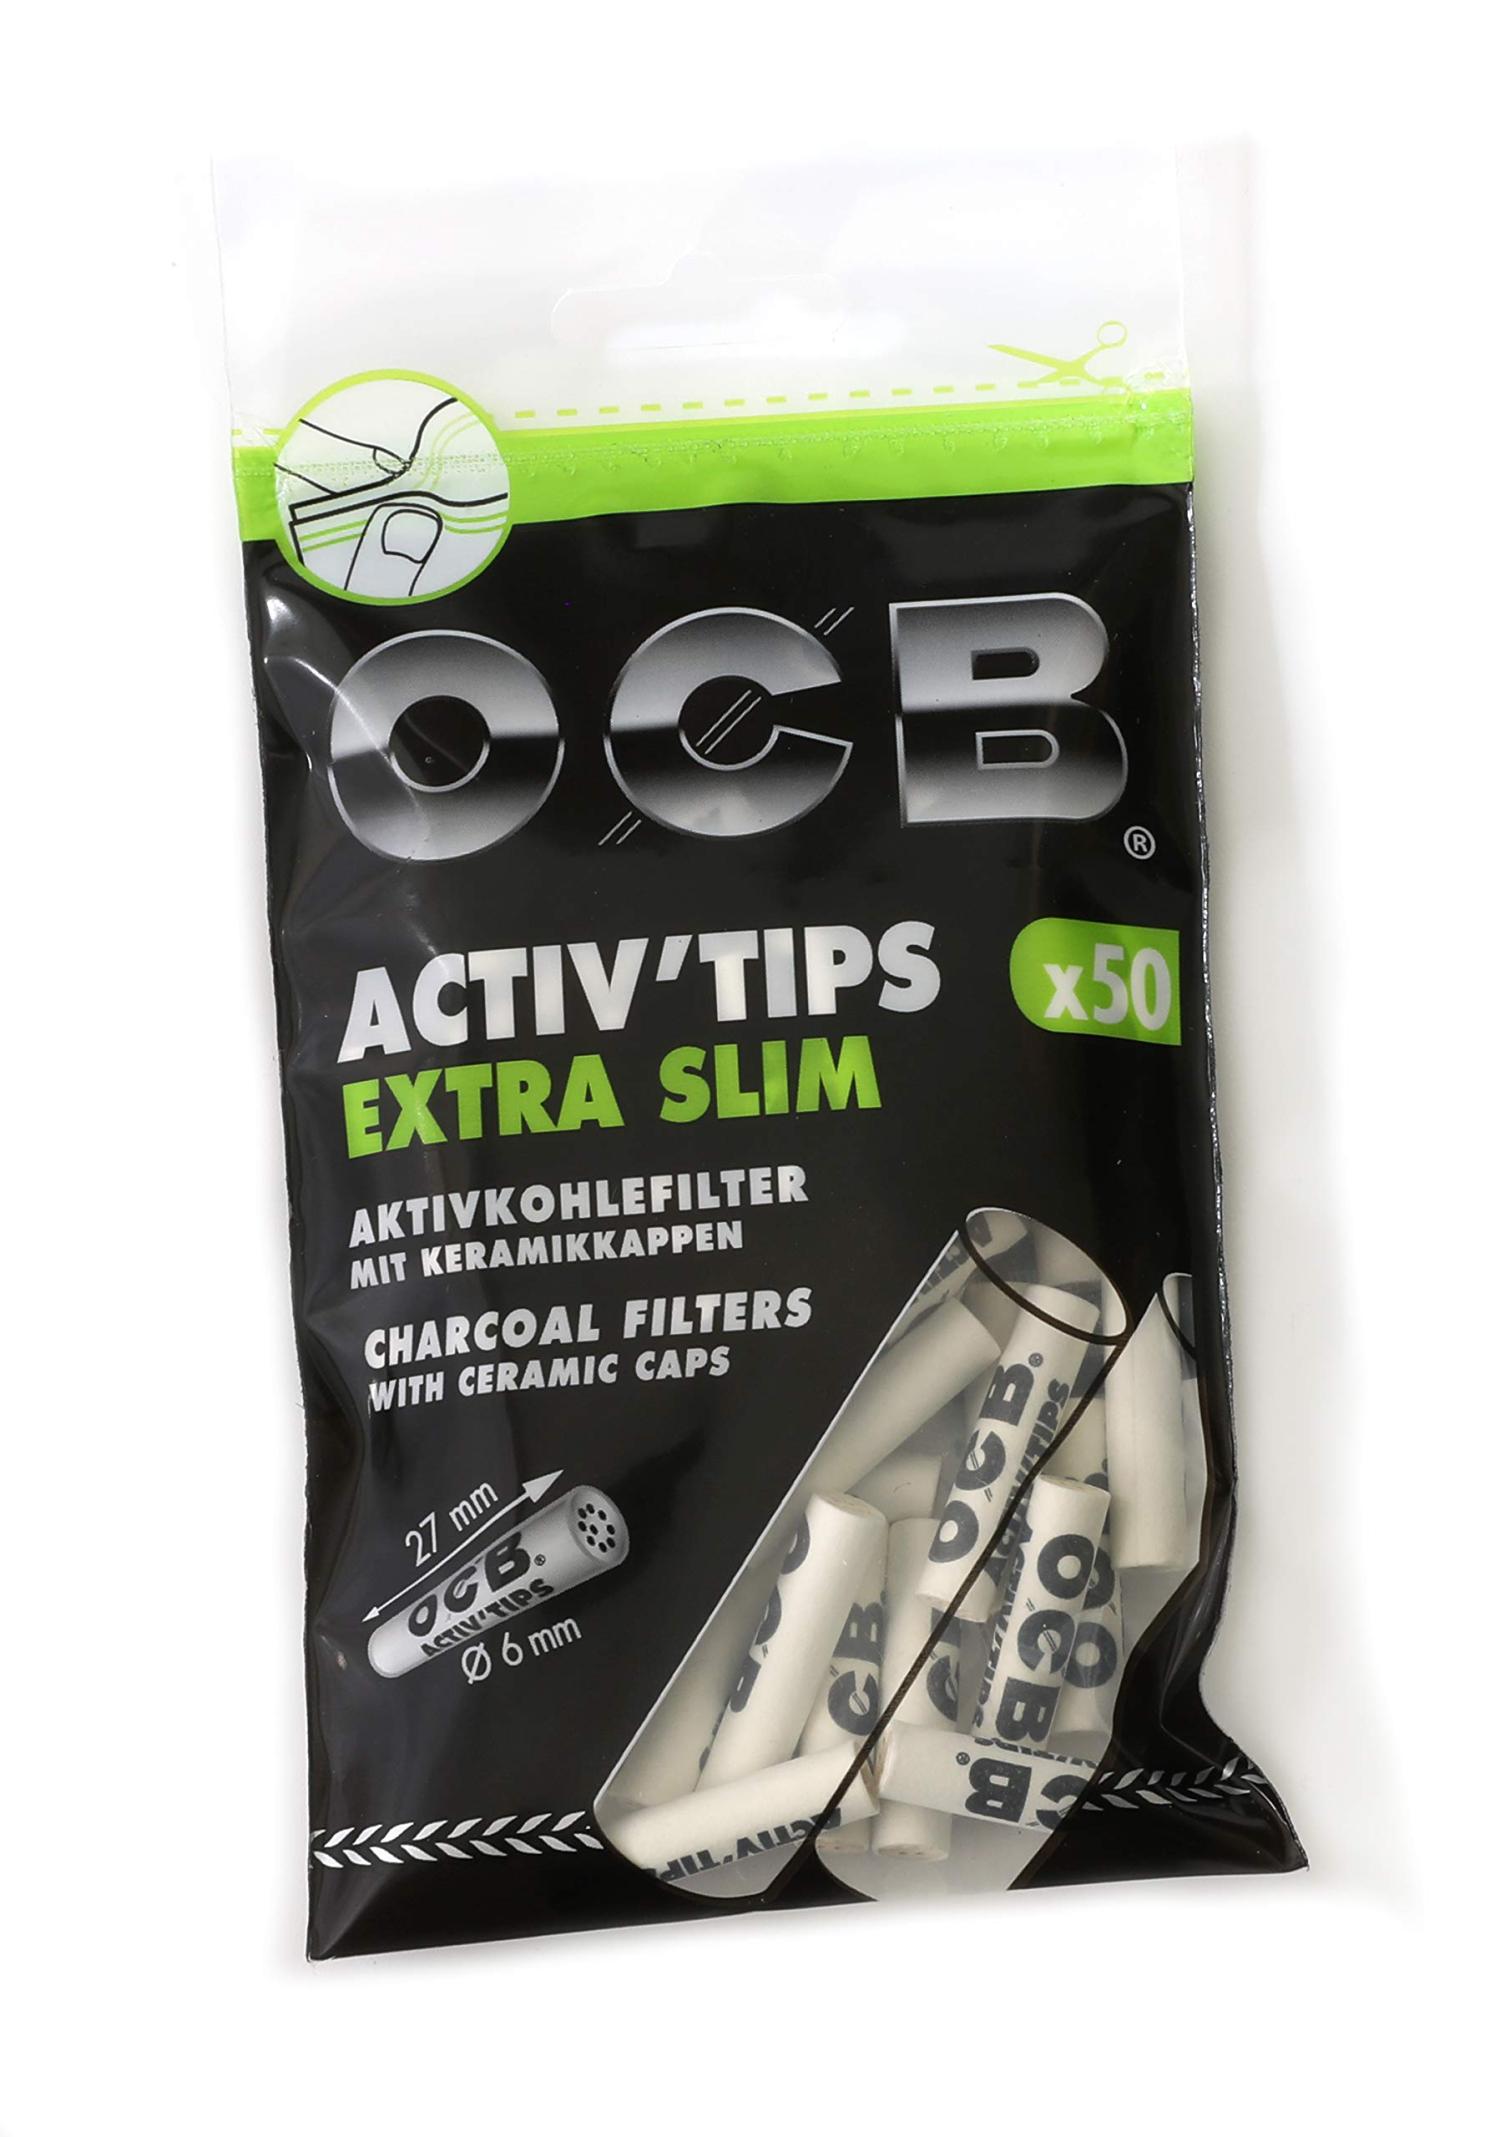 Activ'Tips Slim Activated Charcoal Filters, OCB